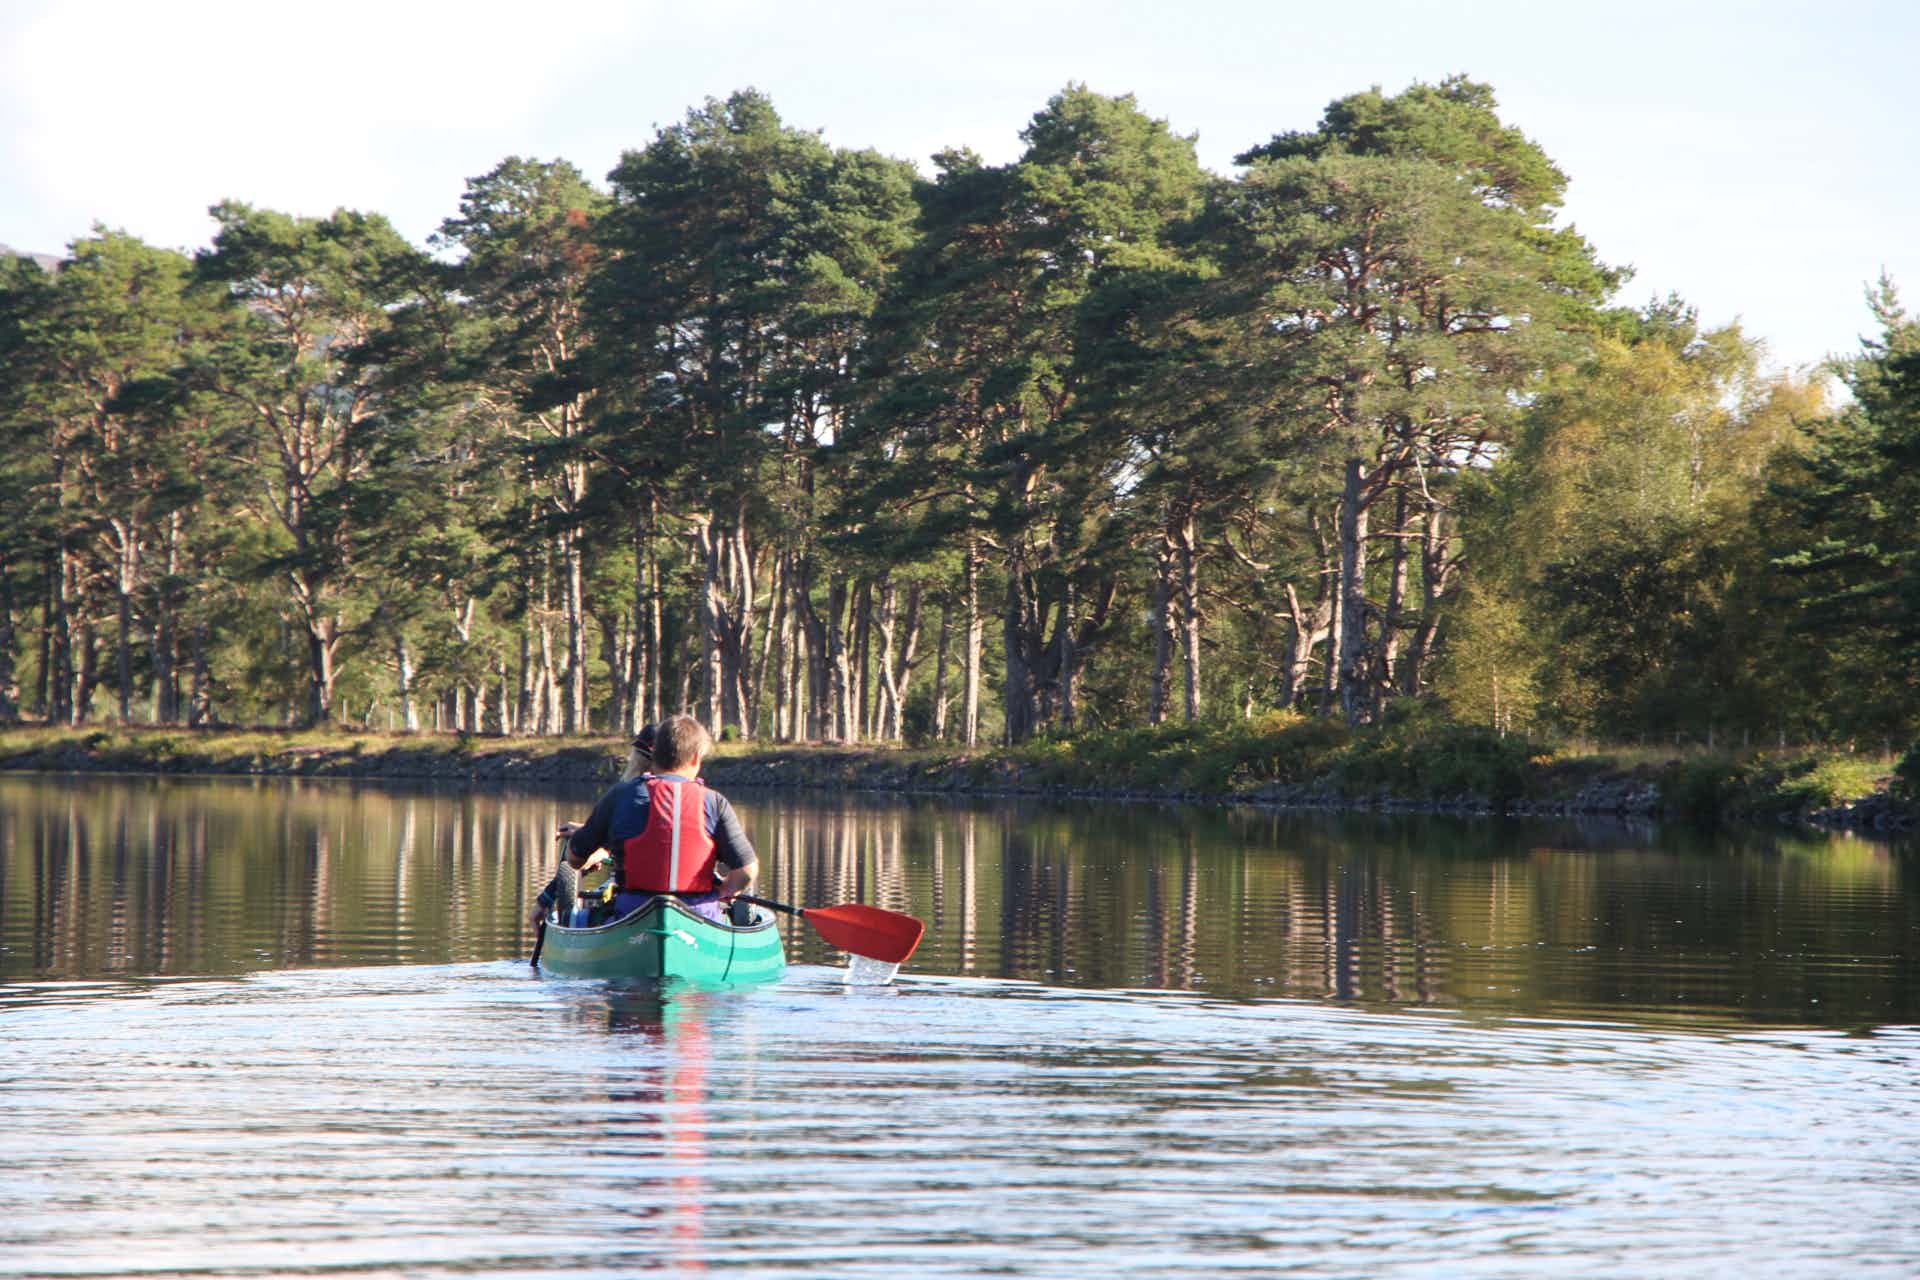 You'll paddle through a variety of Caledonian pine forests and plantations on the Great Glen Way. Photo: Much Better Adventures